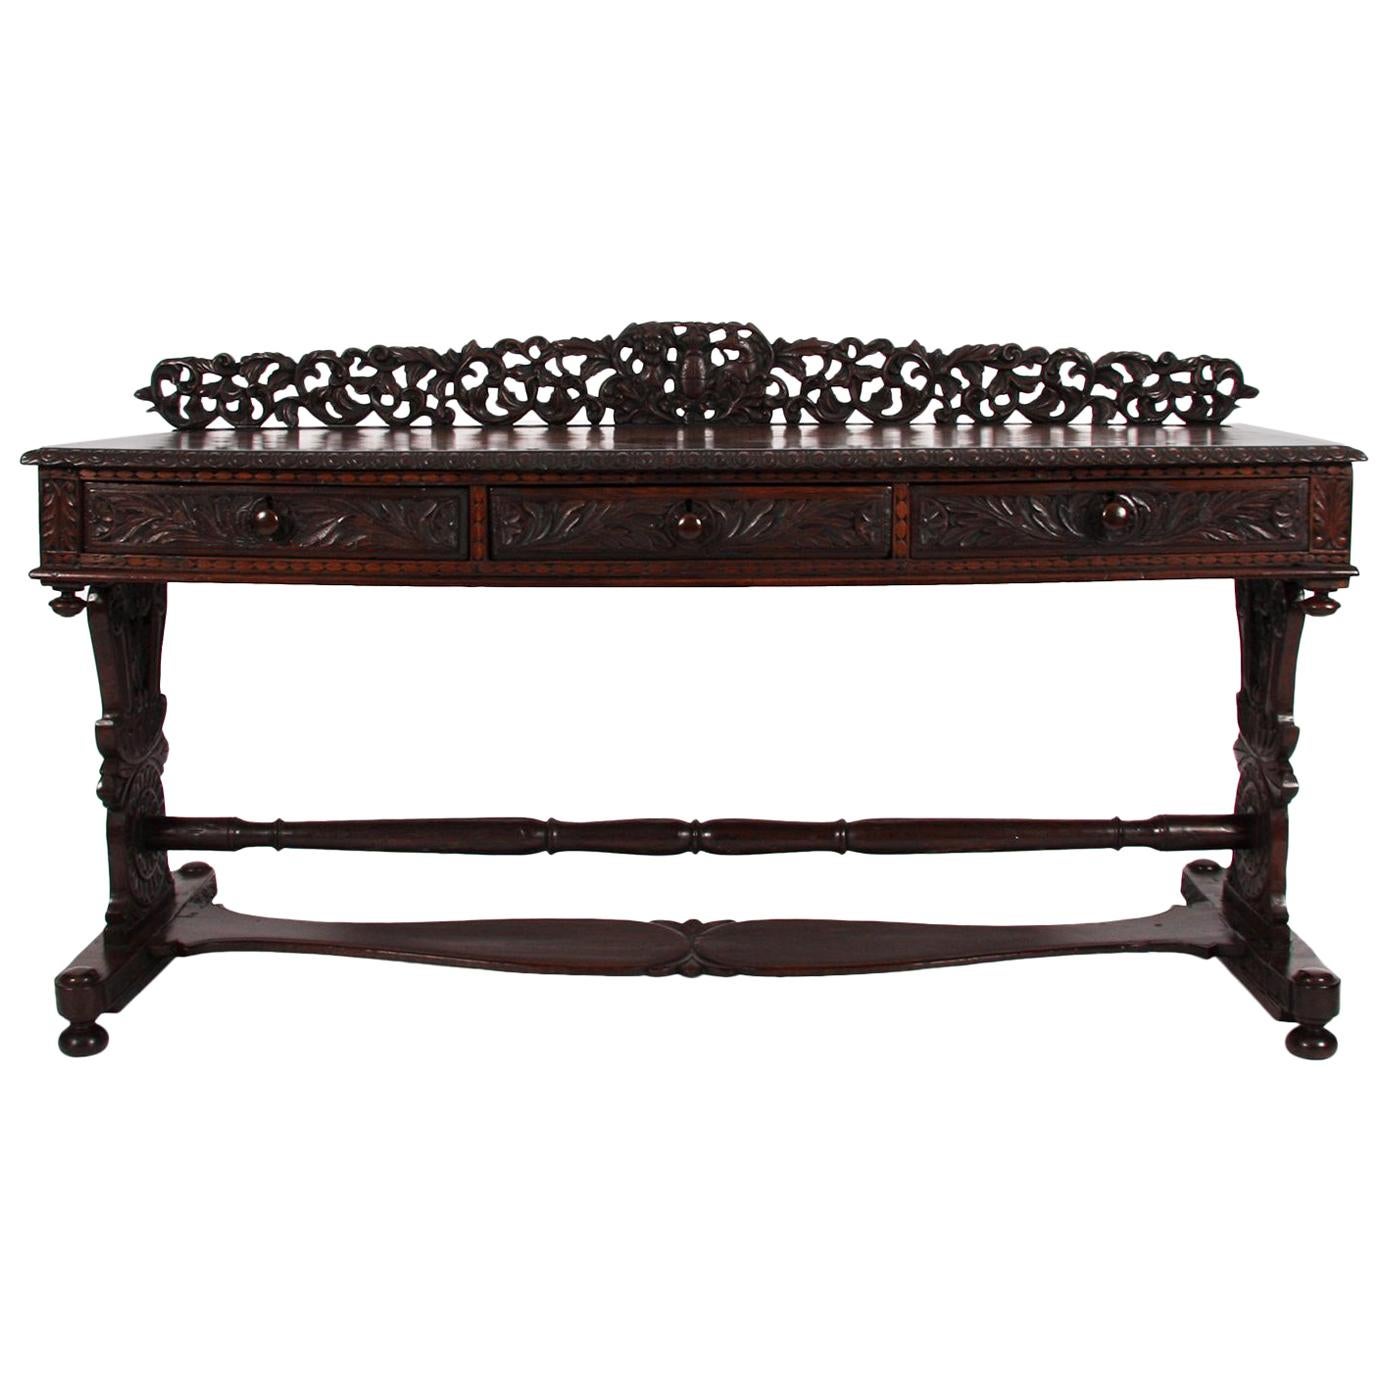 19th Century Black Anglo-Indian Carved Wood Desk